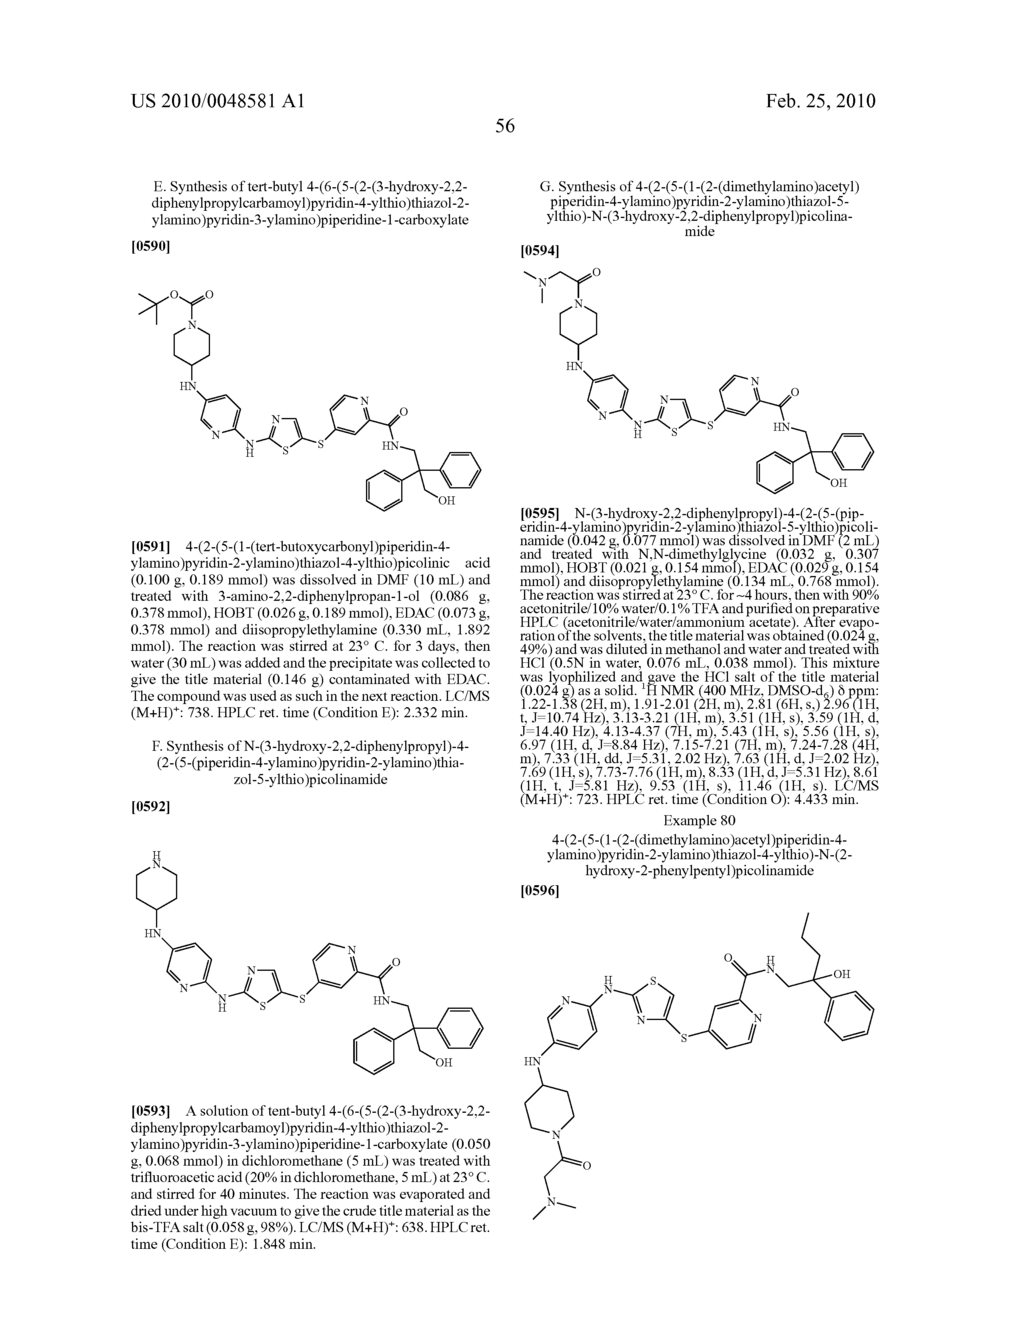 THIAZOLYL COMPOUNDS USEFUL AS KINASE INHIBITORS - diagram, schematic, and image 57